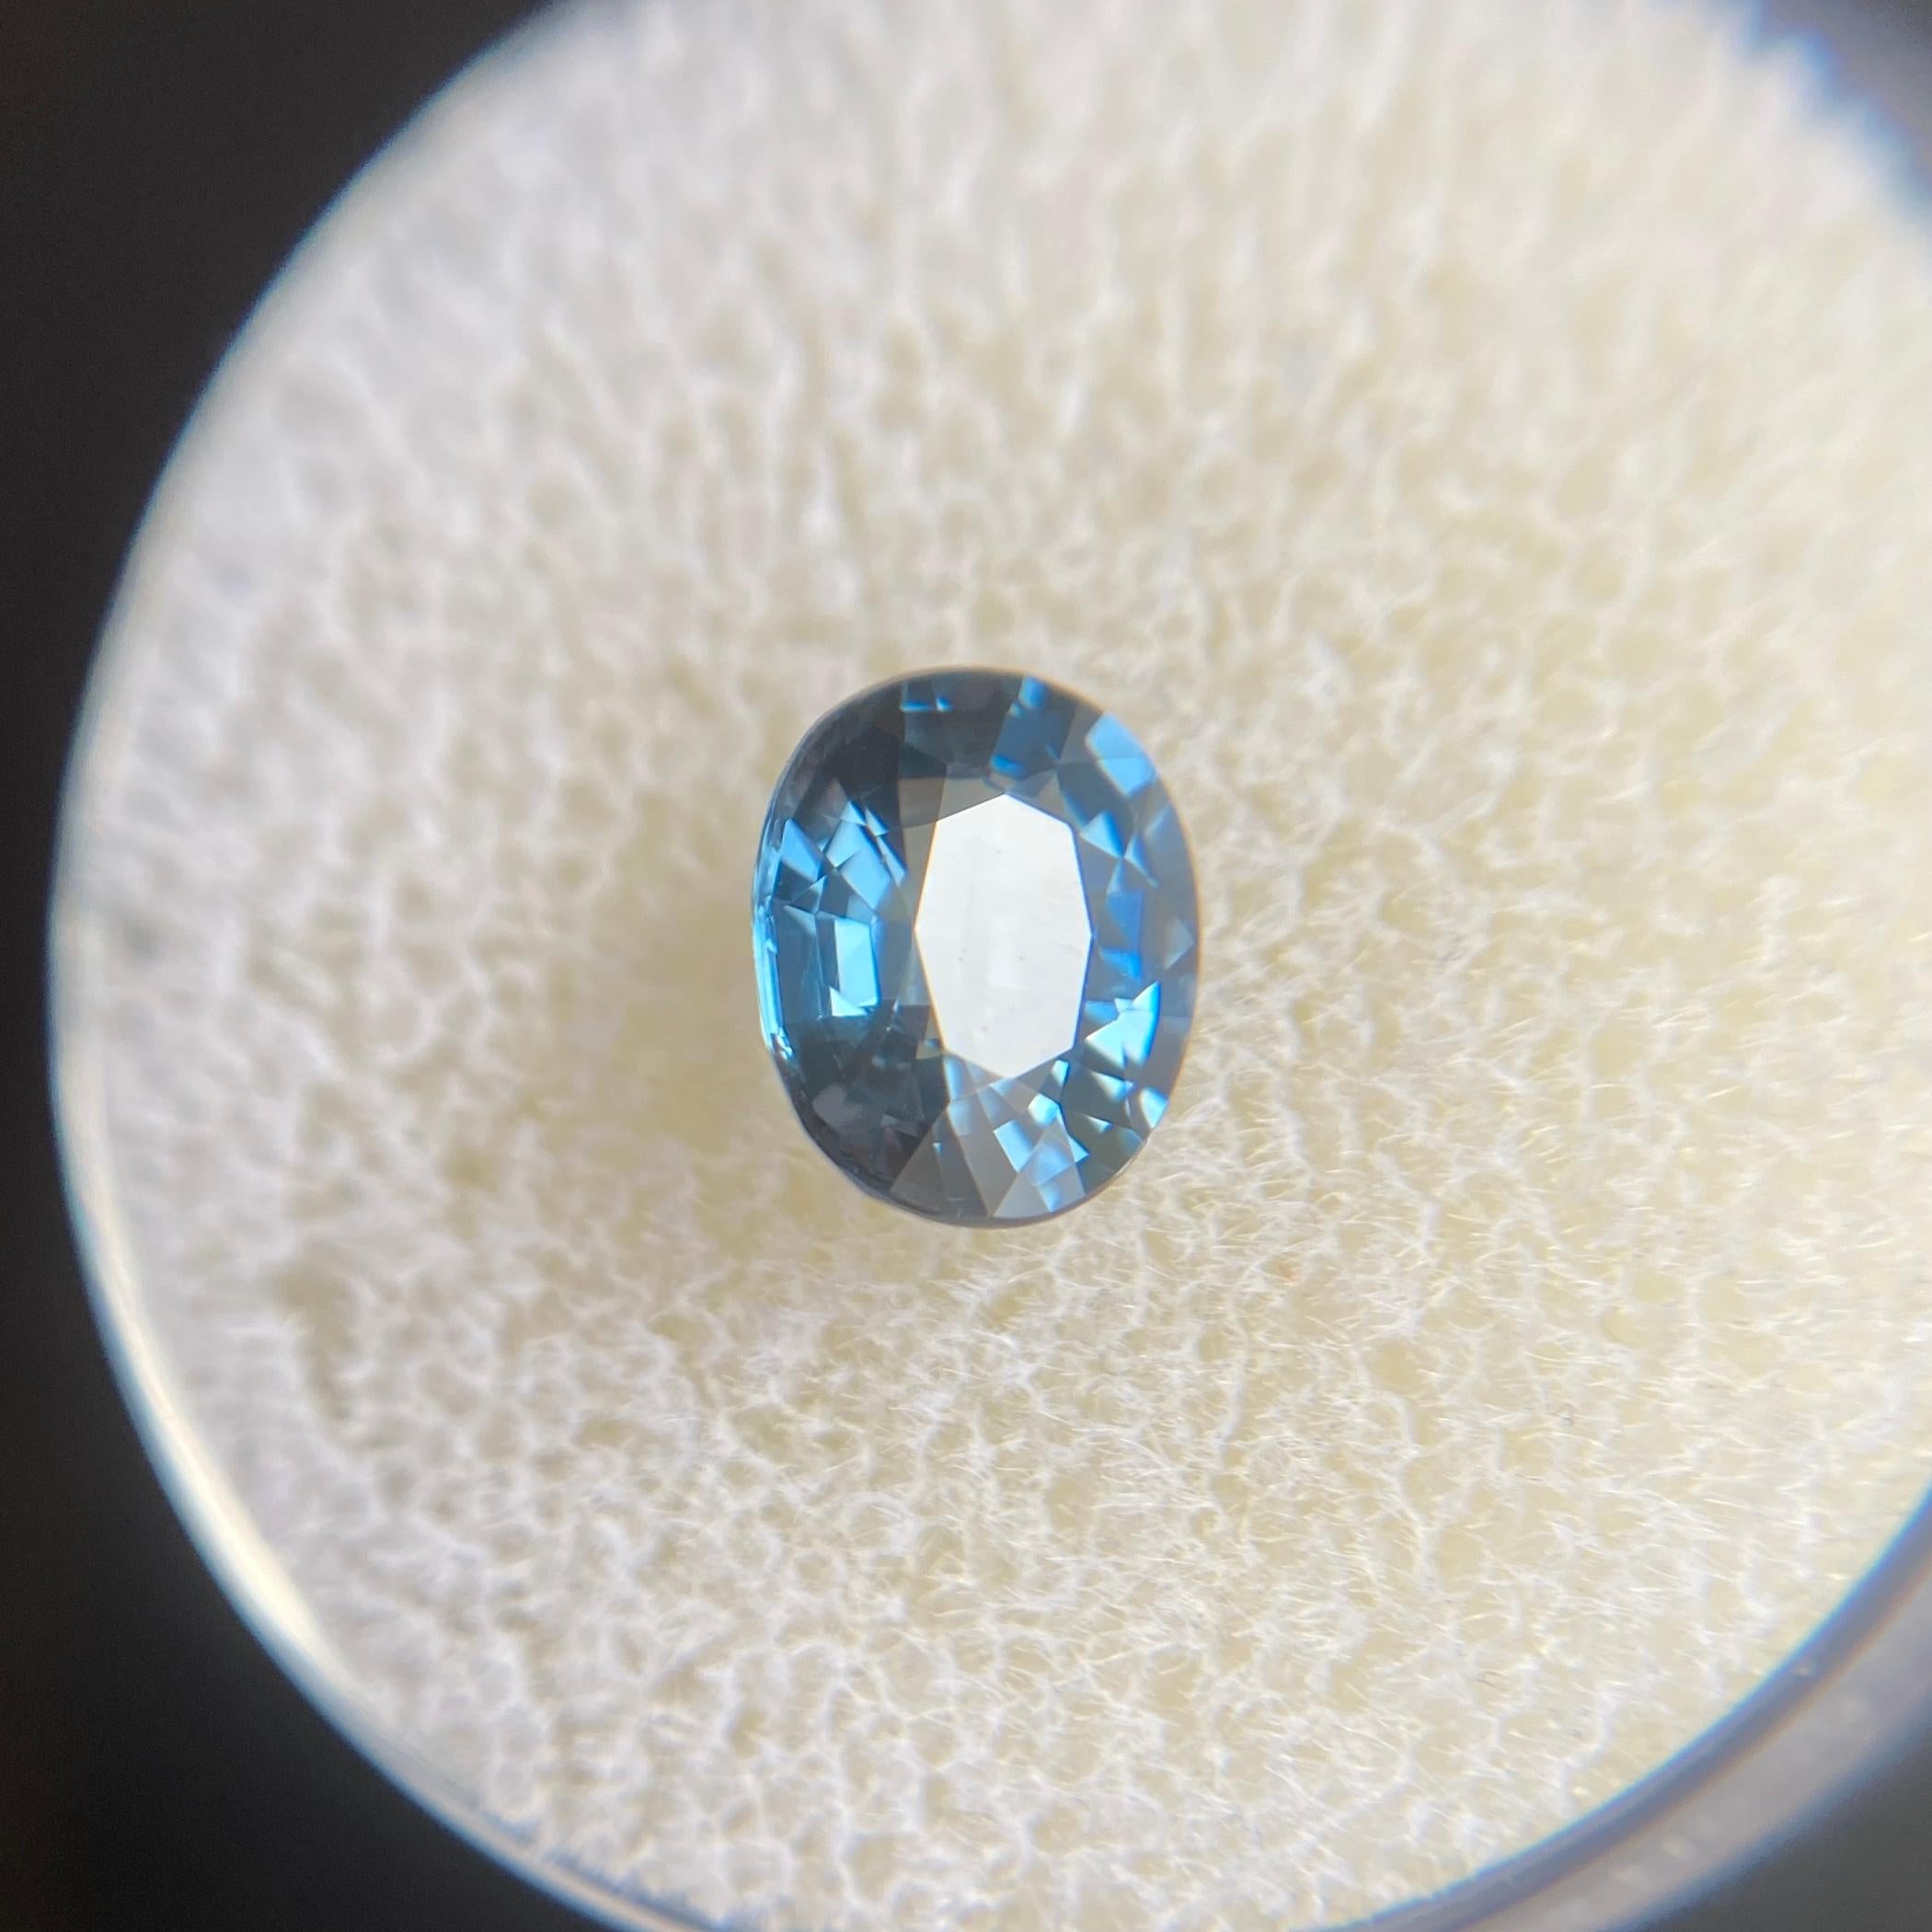 
Fine Natural Blue Spinel Gemstone.

Rare spinel with a fine vivid blue colour and excellent clarity. Practically flawless gem. Totally untreated and unheated. Also has an excellent oval cut measuring 7x5.8mm.

As with all our photos, there is no